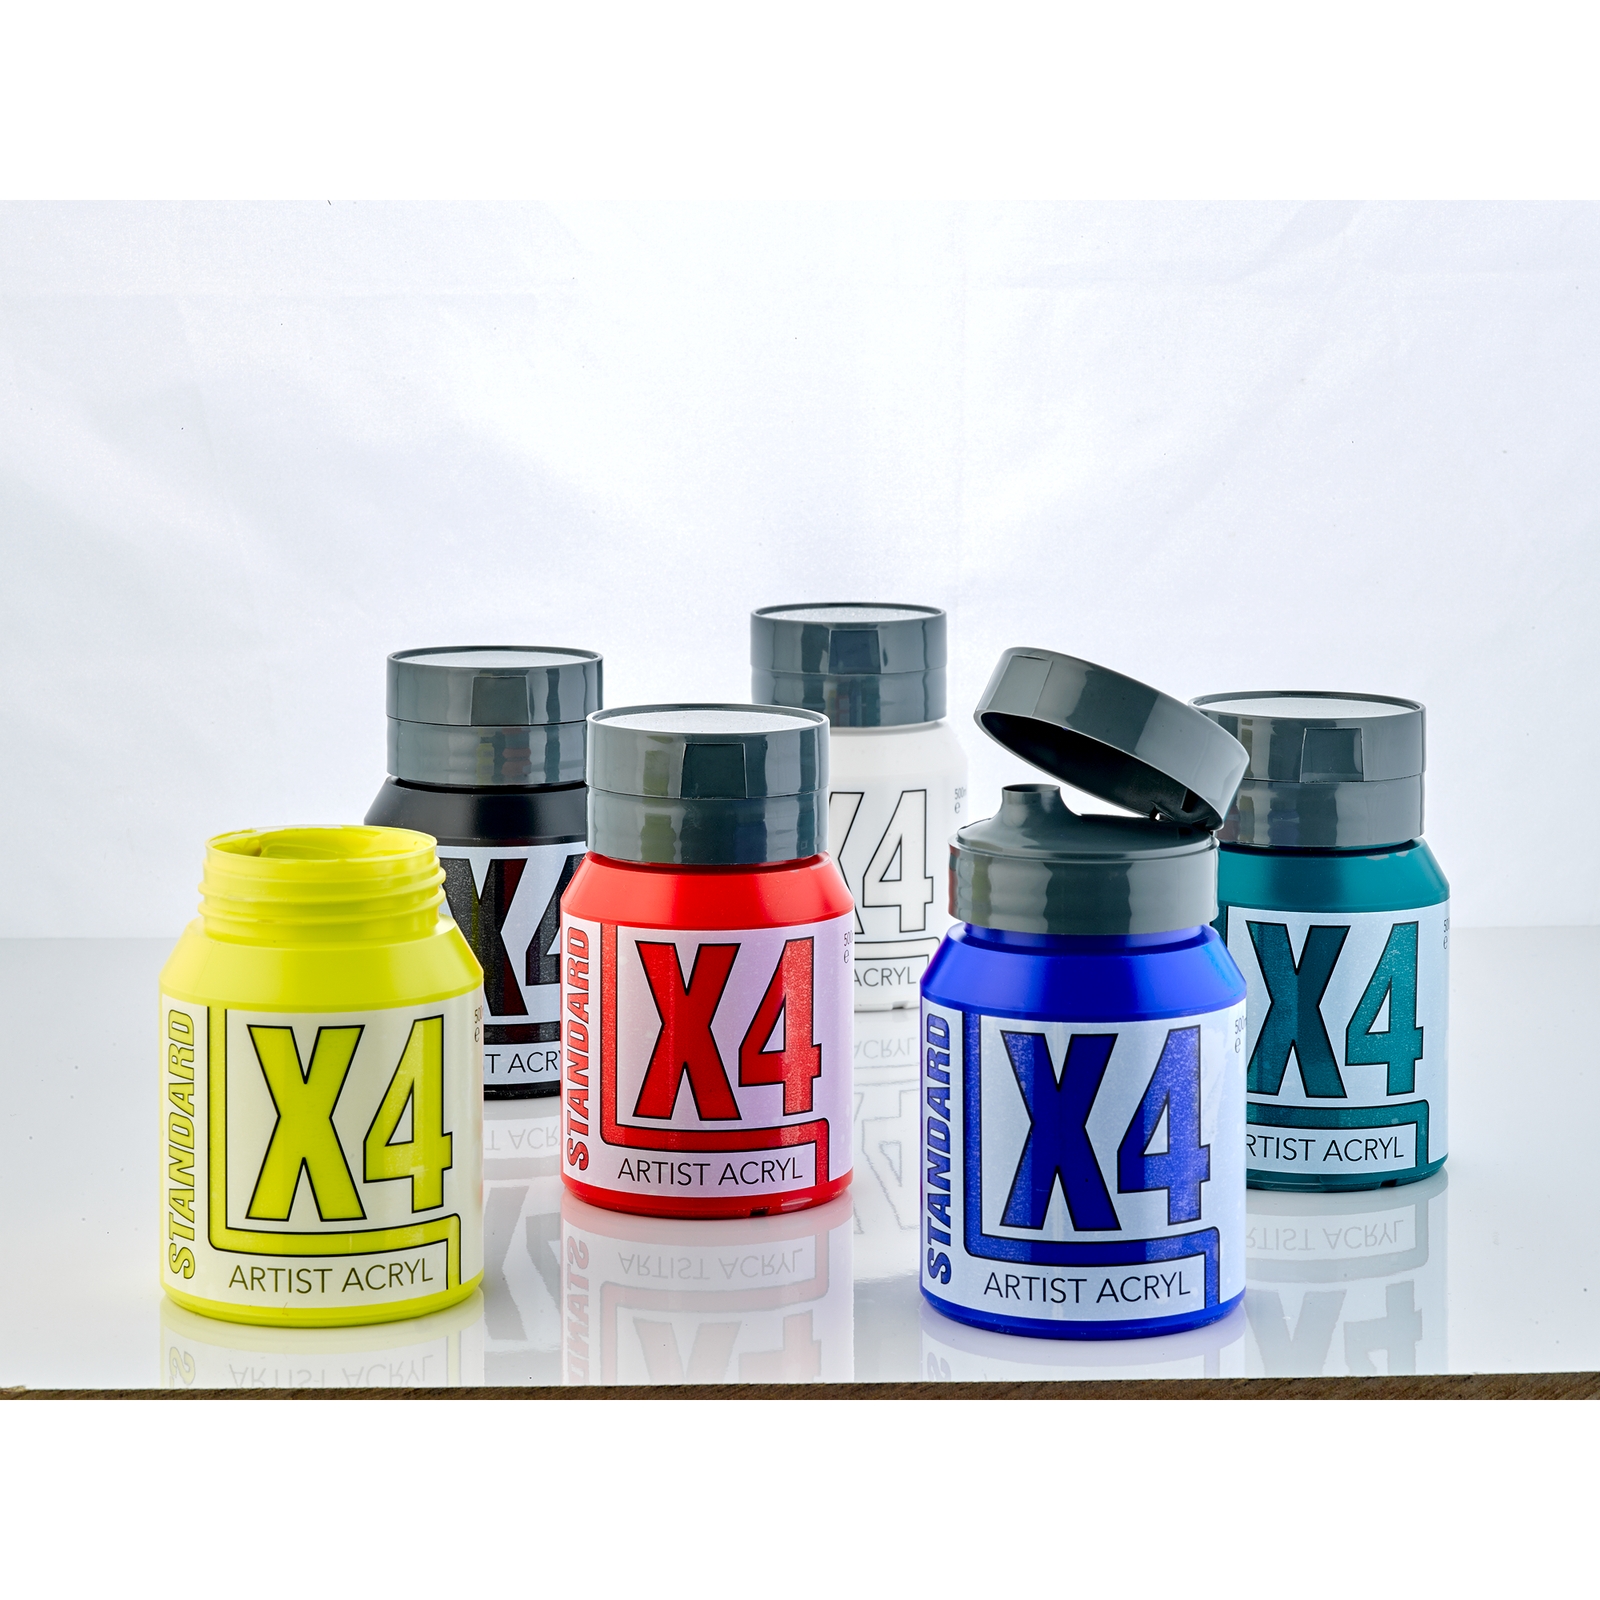 Specialist Crafts X4 Standard Acryl/Acrylic Paint - 500ml - Assorted - Set 1 - Pack of 6